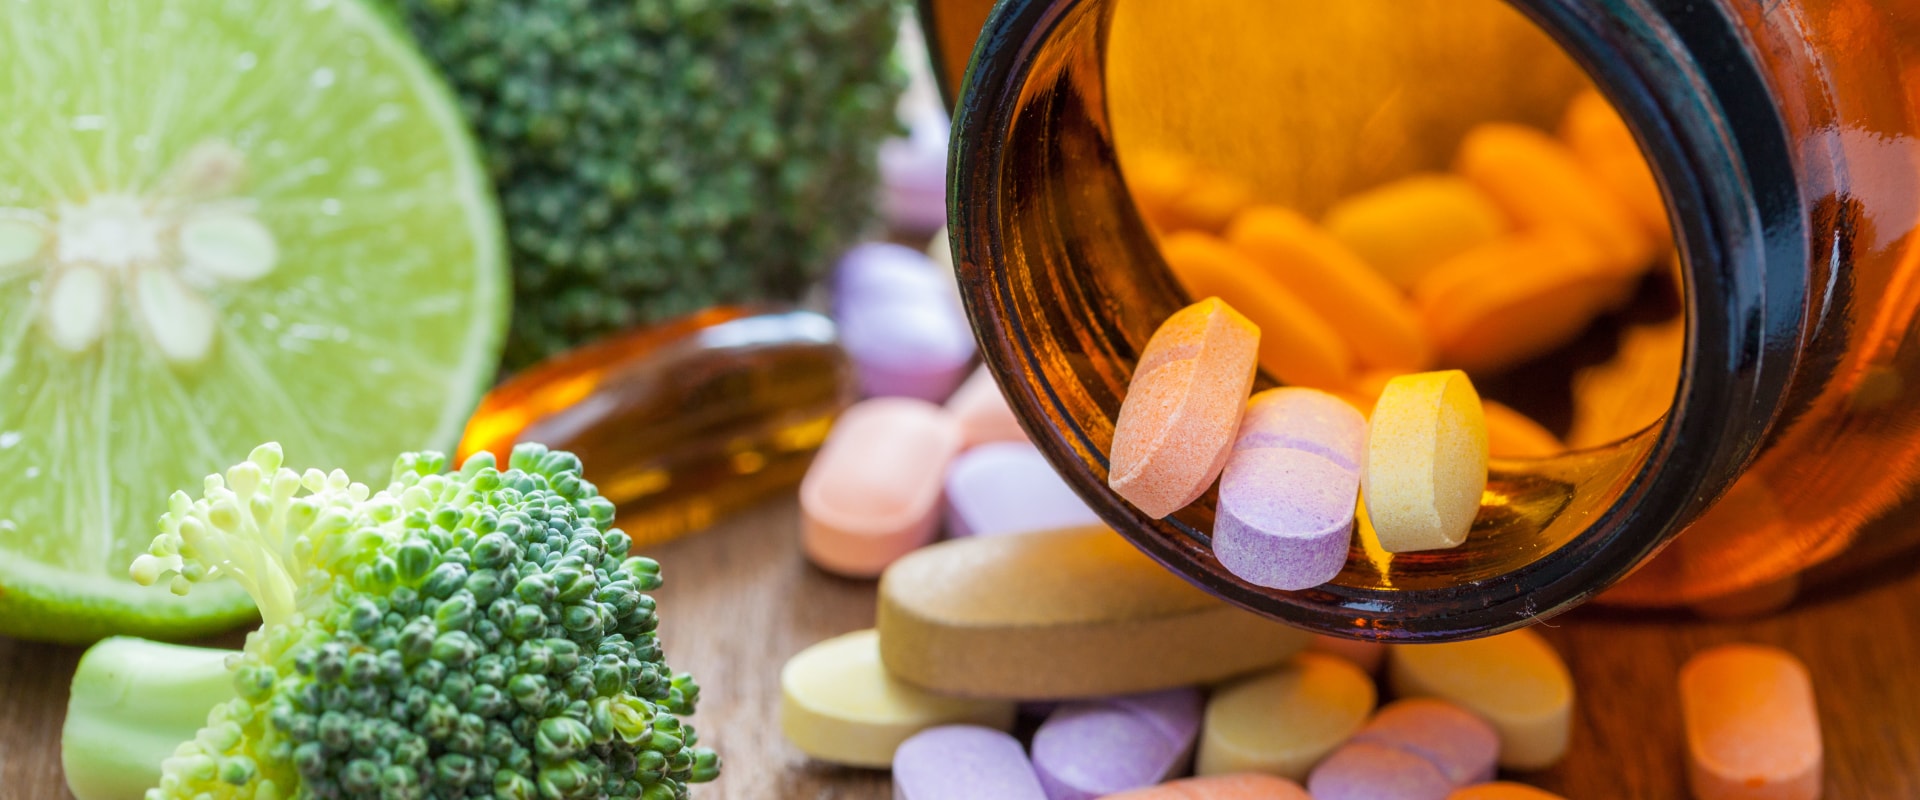 Are supplements not regulated by the us food and drug administration?